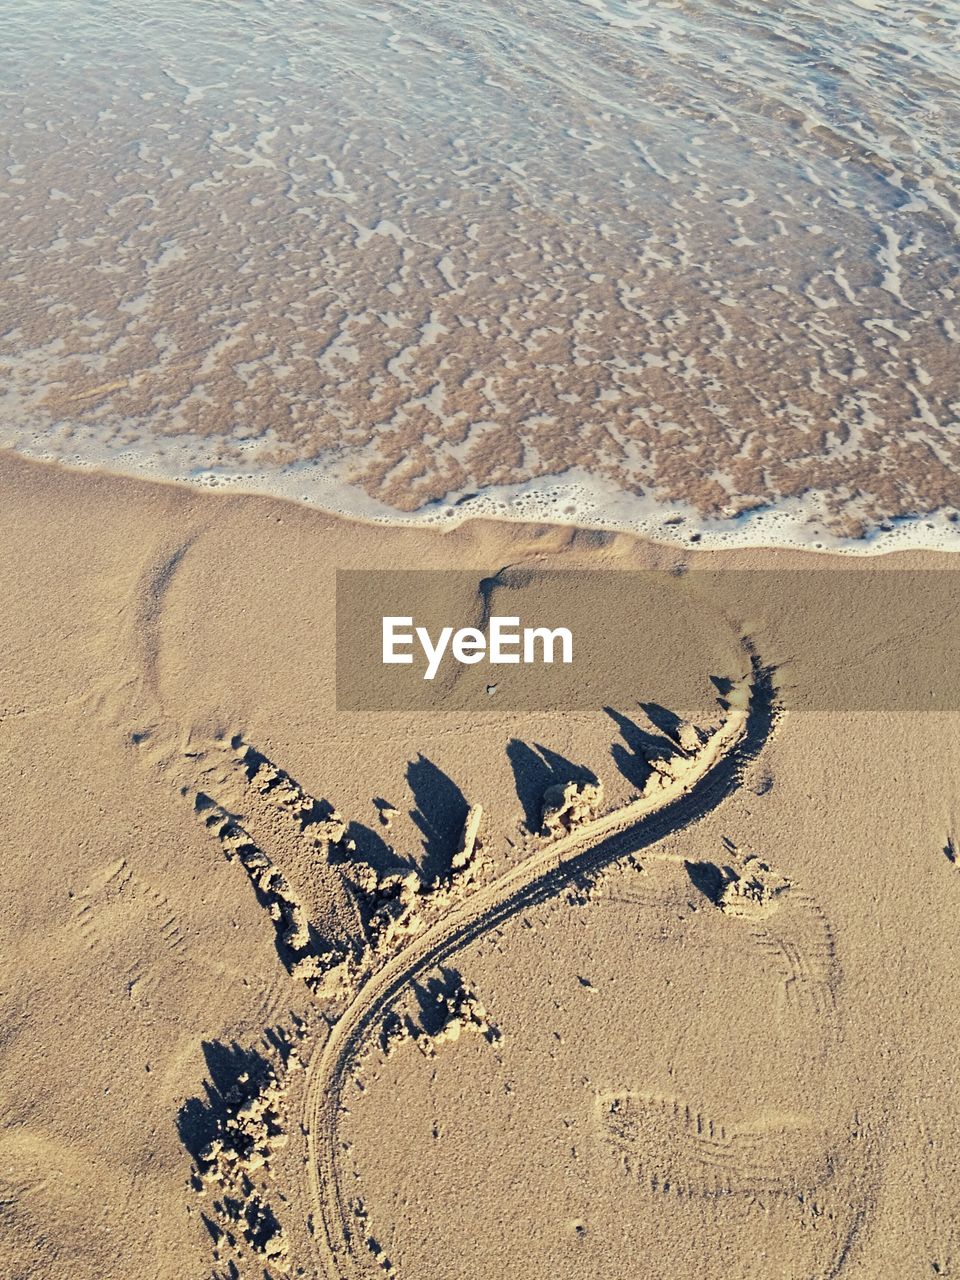 HIGH ANGLE VIEW OF FOOTPRINTS ON SAND AT SHORE